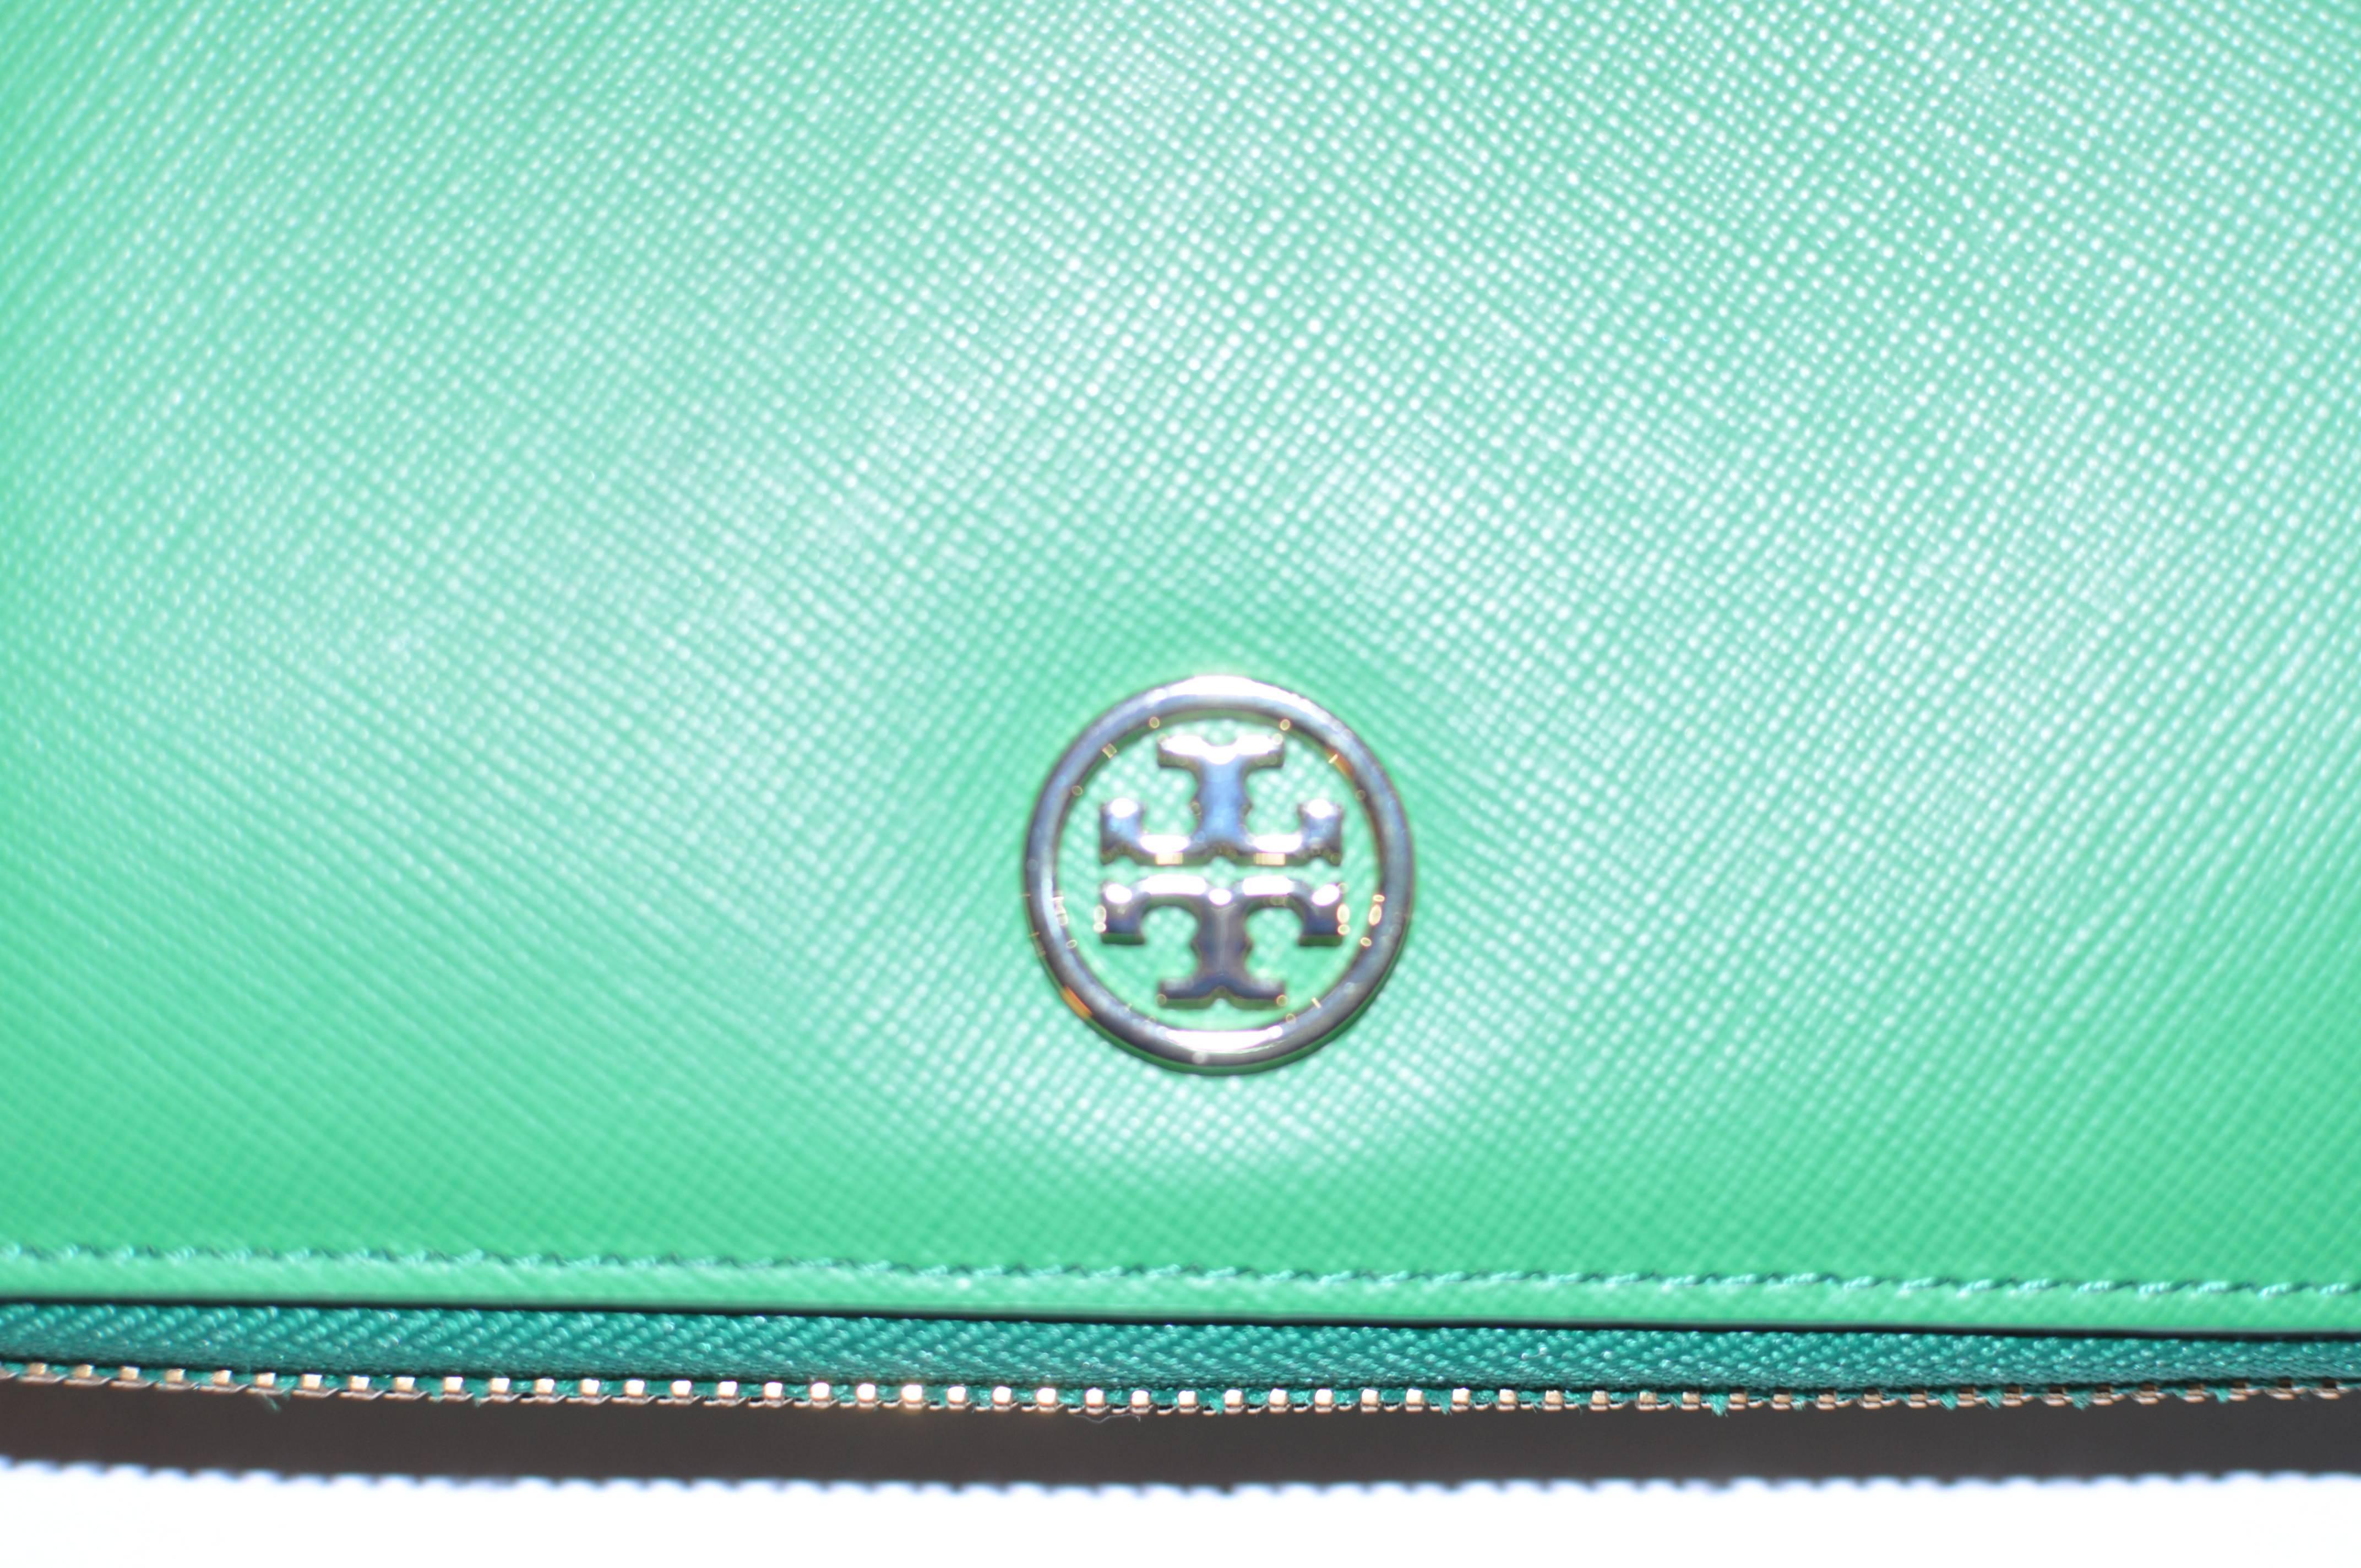 This is a never used wallet with a gold-tone Tory Burch logo, which zips on three sides with a gold-tone pull. Inside there are 8 slots for credit cards;two slots for paper money and a center zipped compartment.